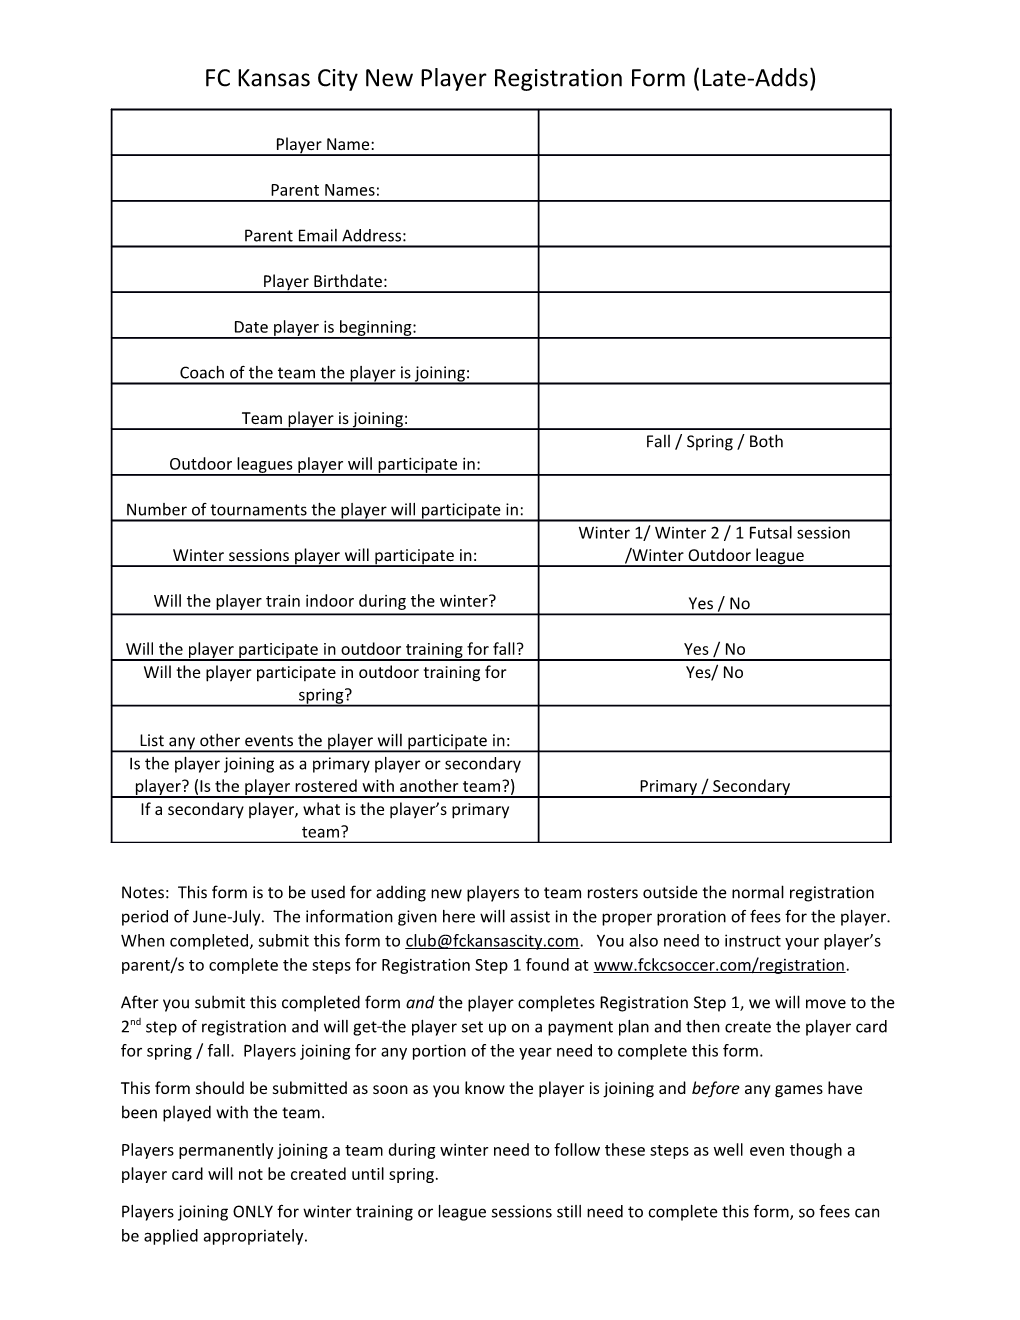 FC Kansas City New Player Registration Form (Late-Adds)